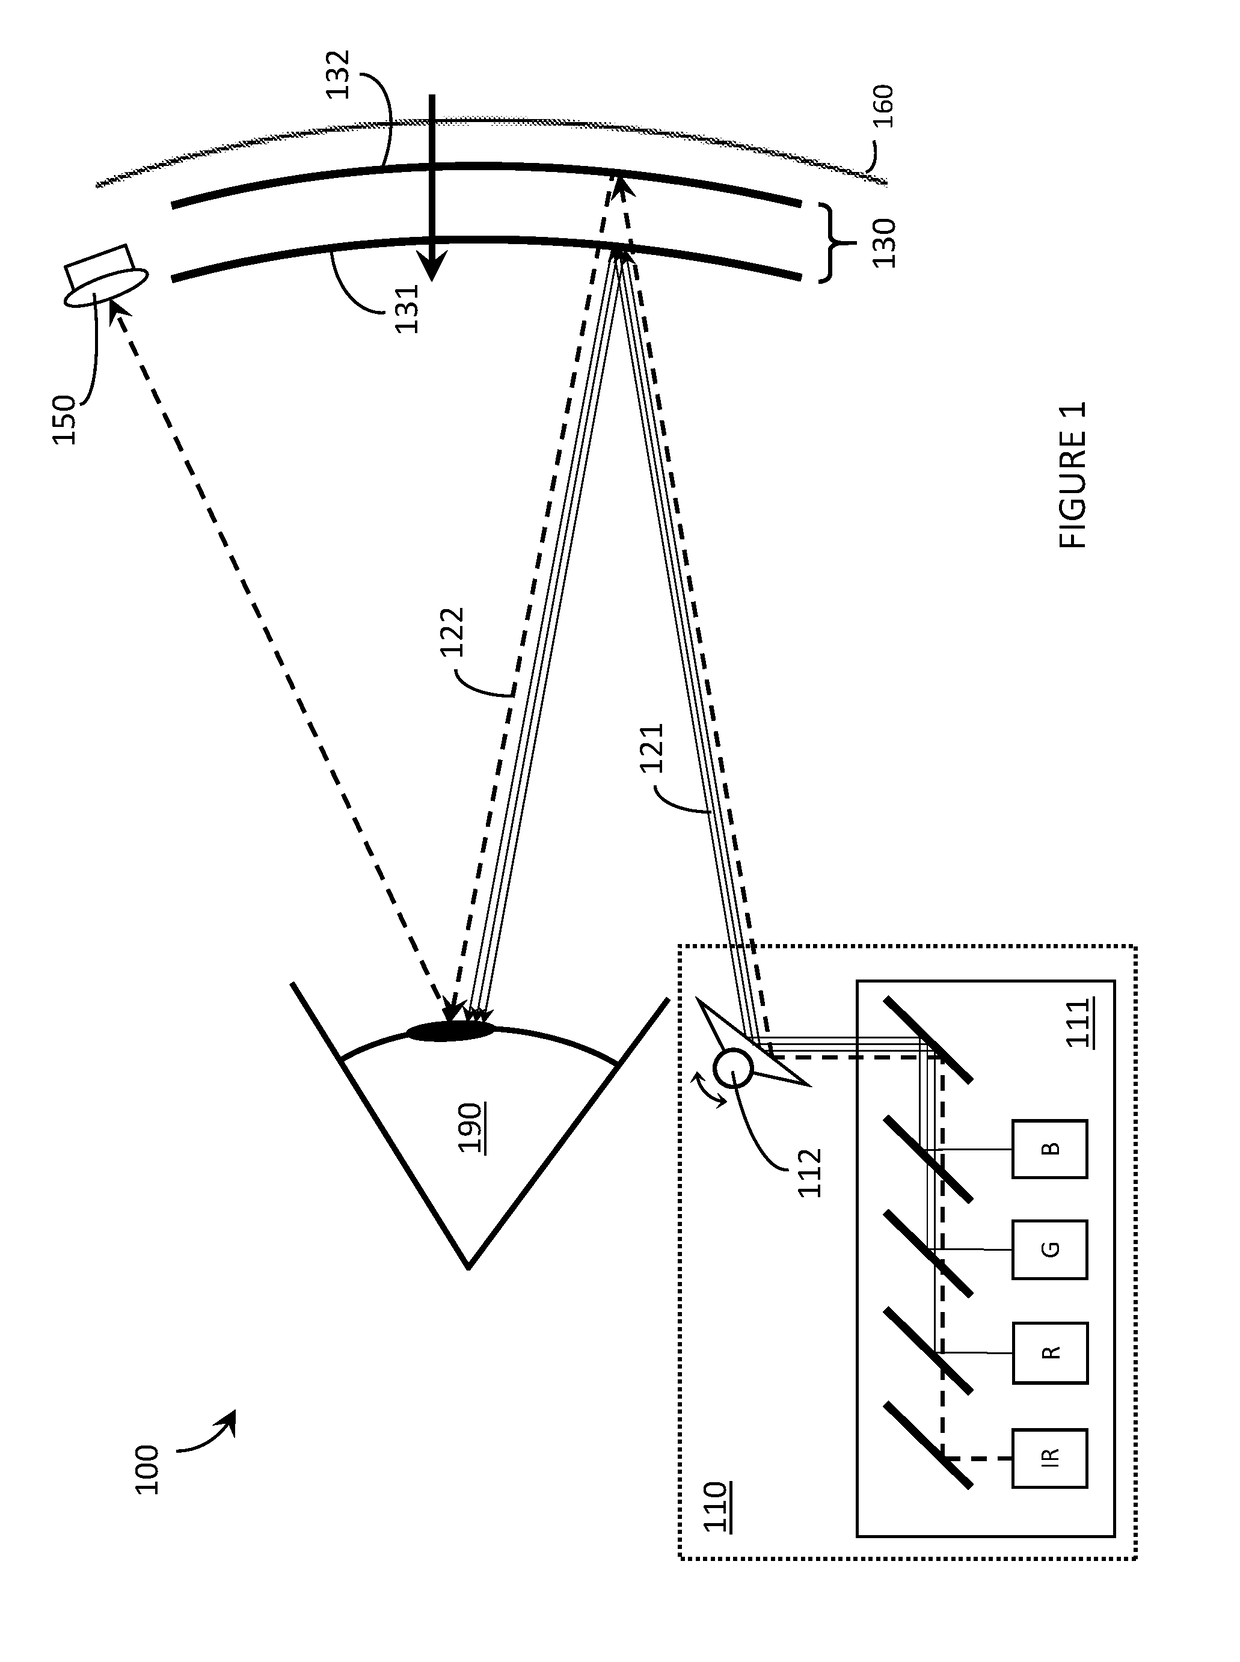 Dynamic calibration systems and methods for wearable heads-up displays